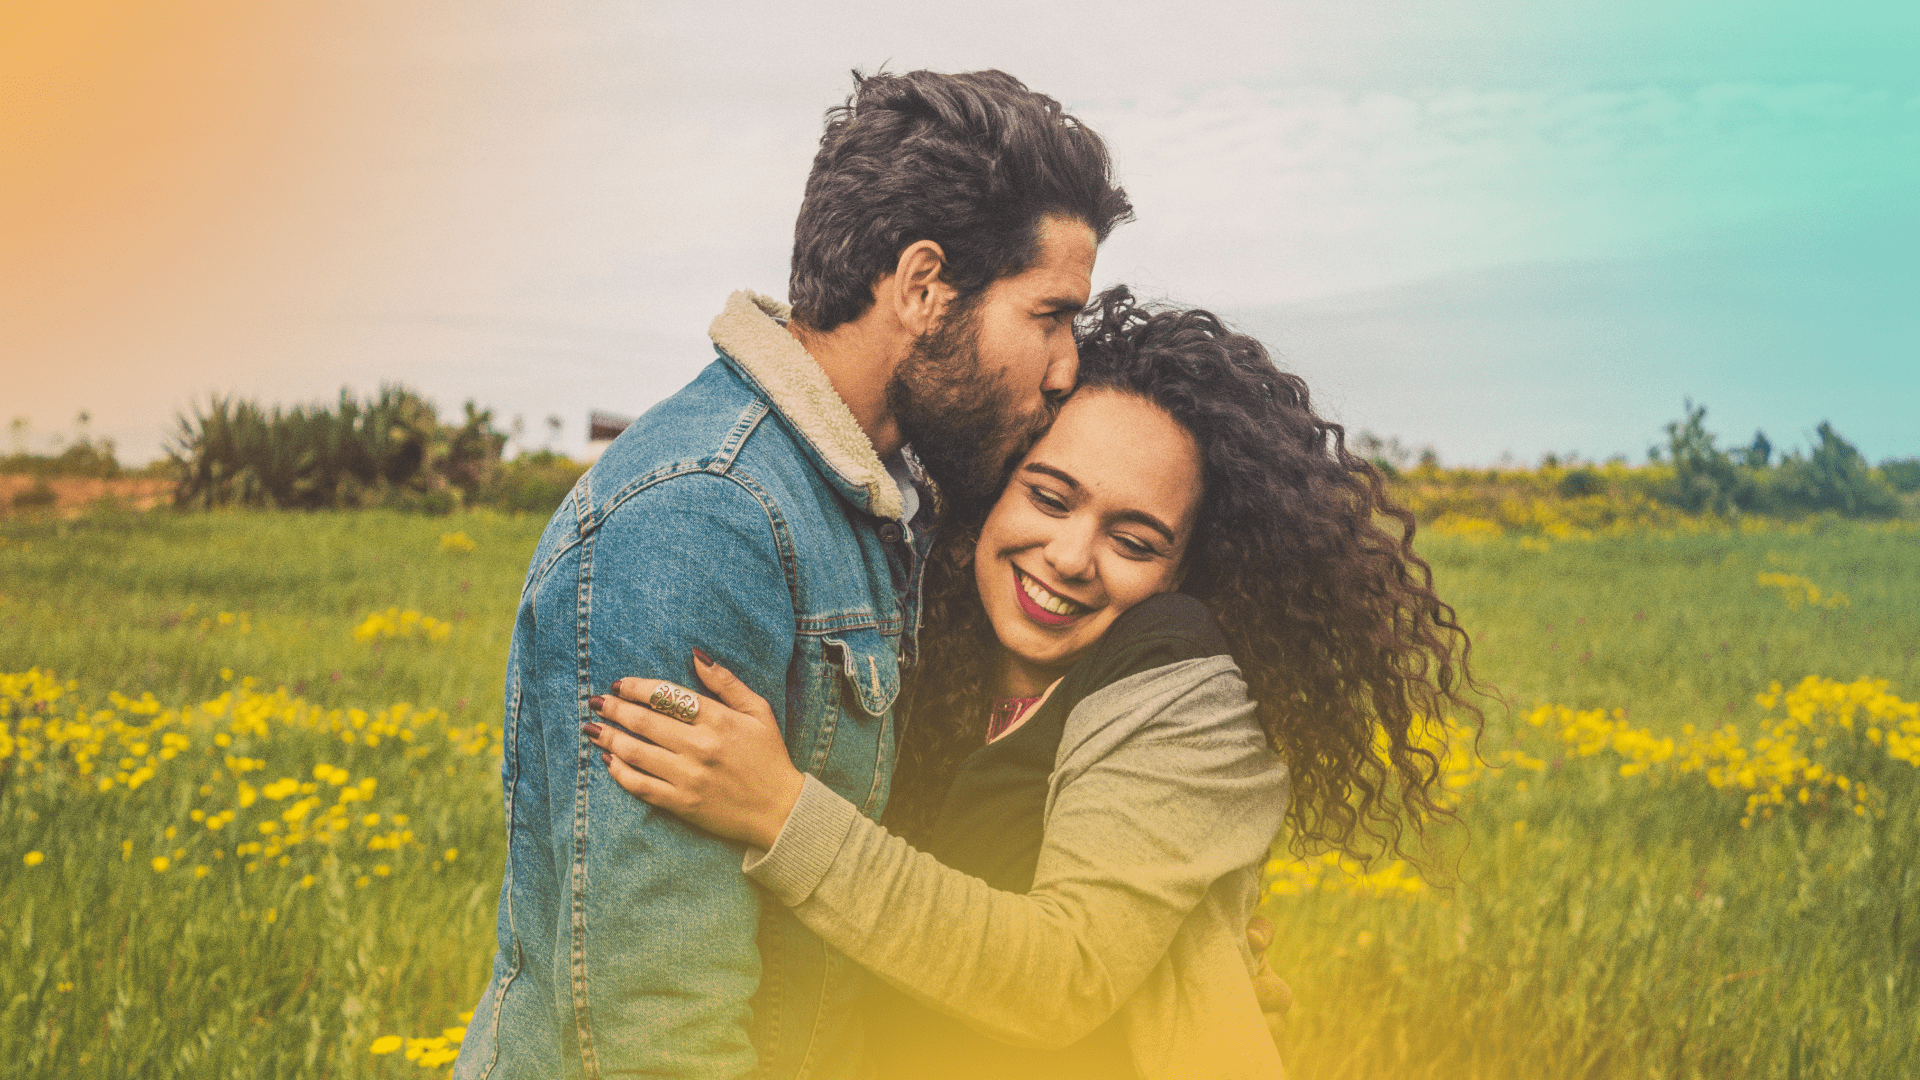 Top Tips to Reconnect with Your Partner After a Relationship Break